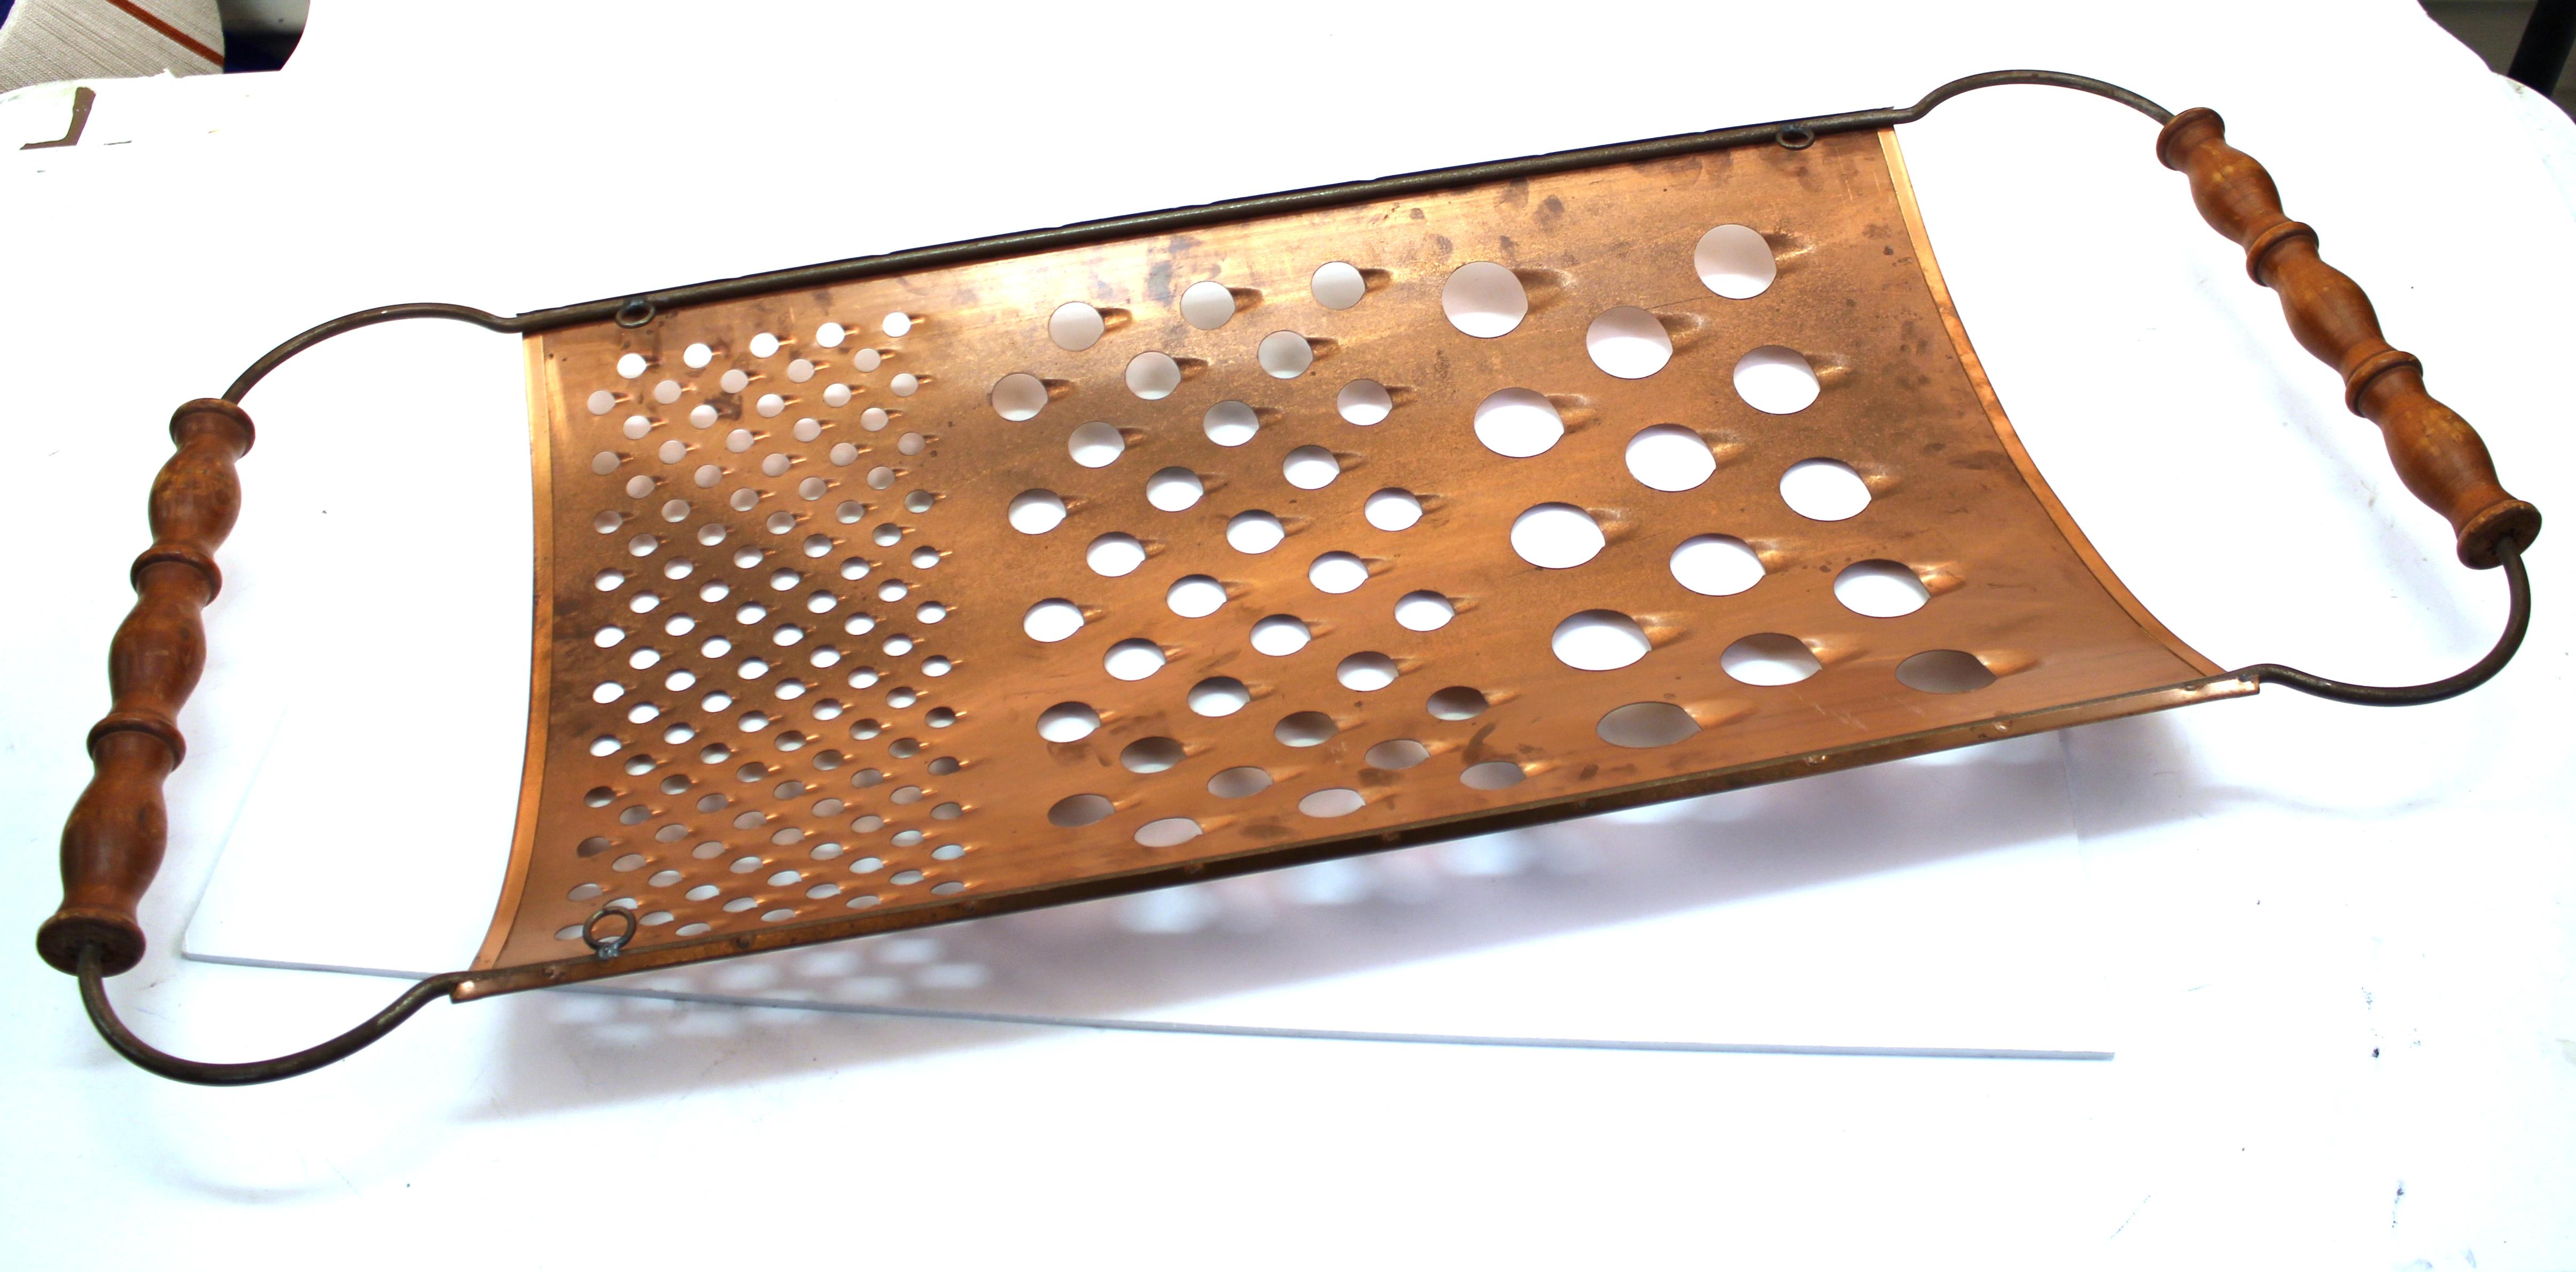 Mid-Century Modern oversized brass shredder or cheese grater designed by Curtis Jere in 1979. The piece is signed and dated and is in great vintage condition.